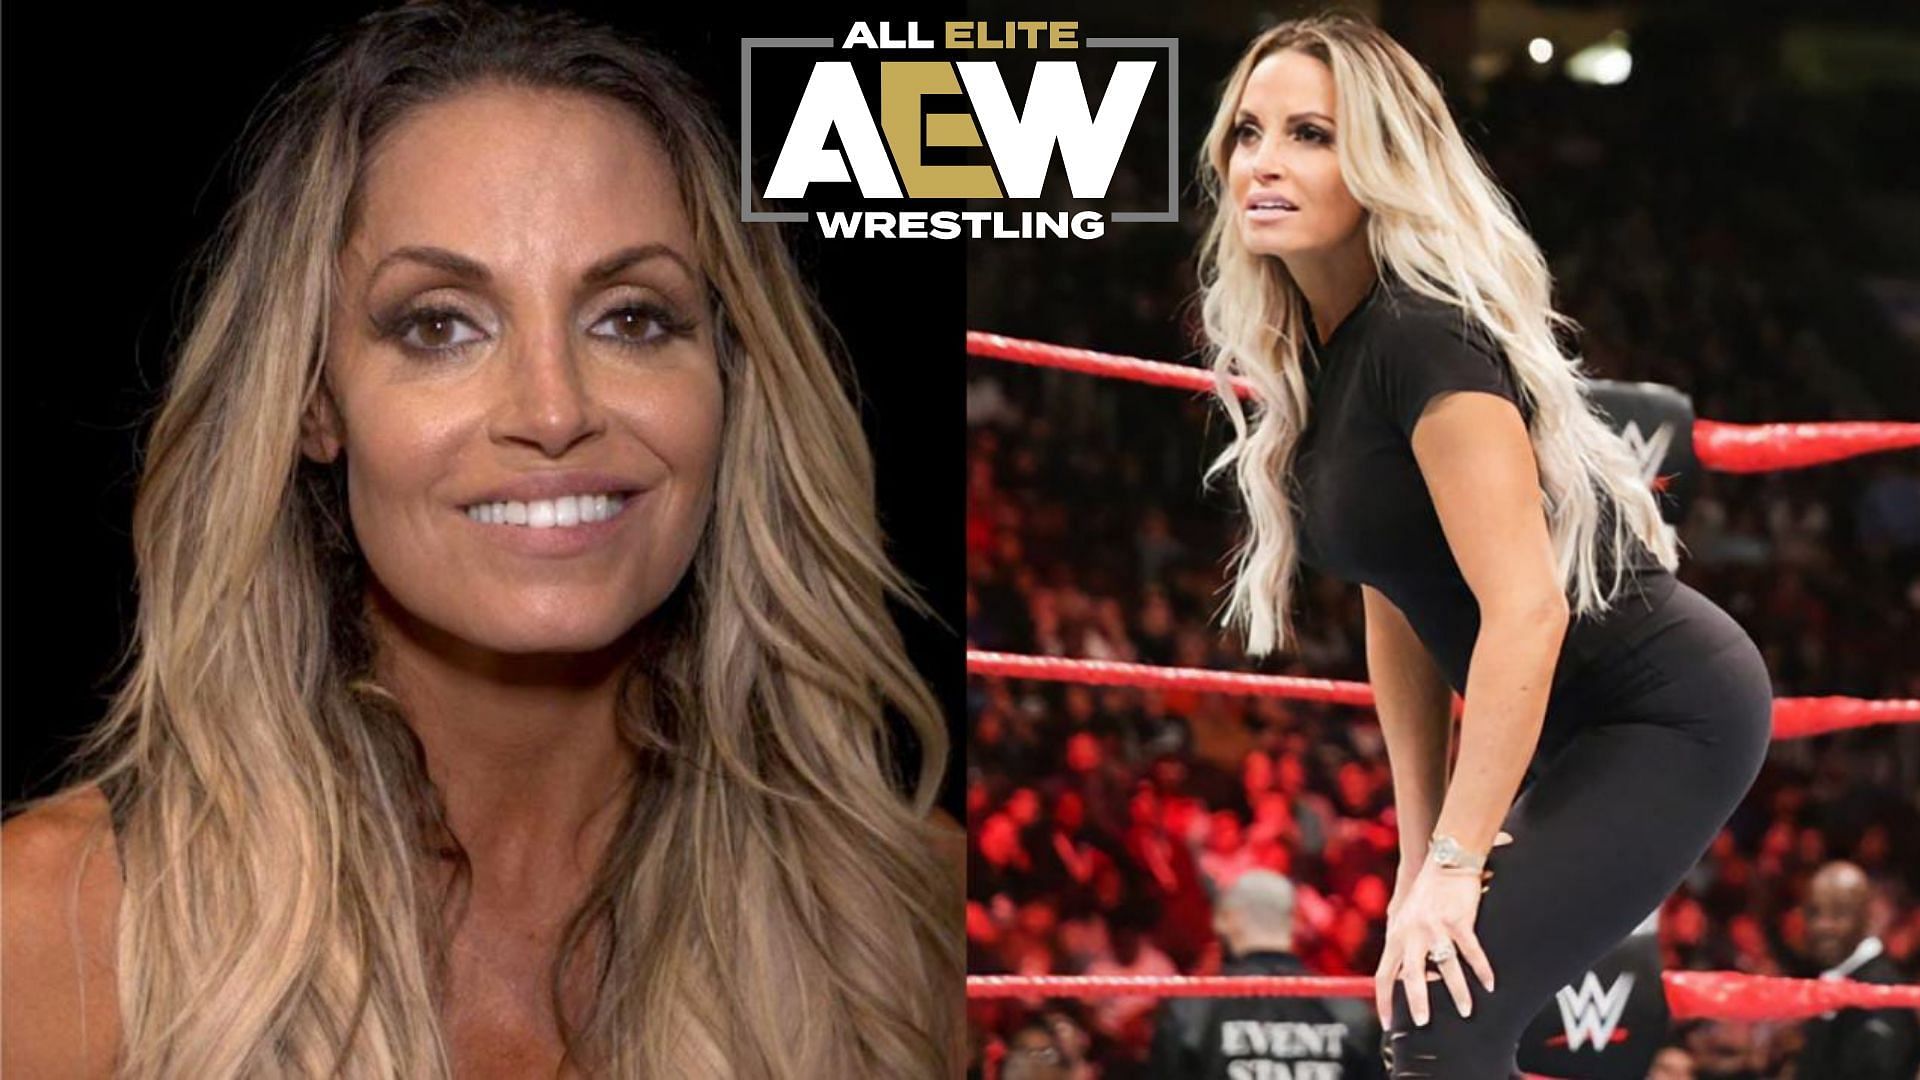 Which AEW star should reunite with Trish Stratus?